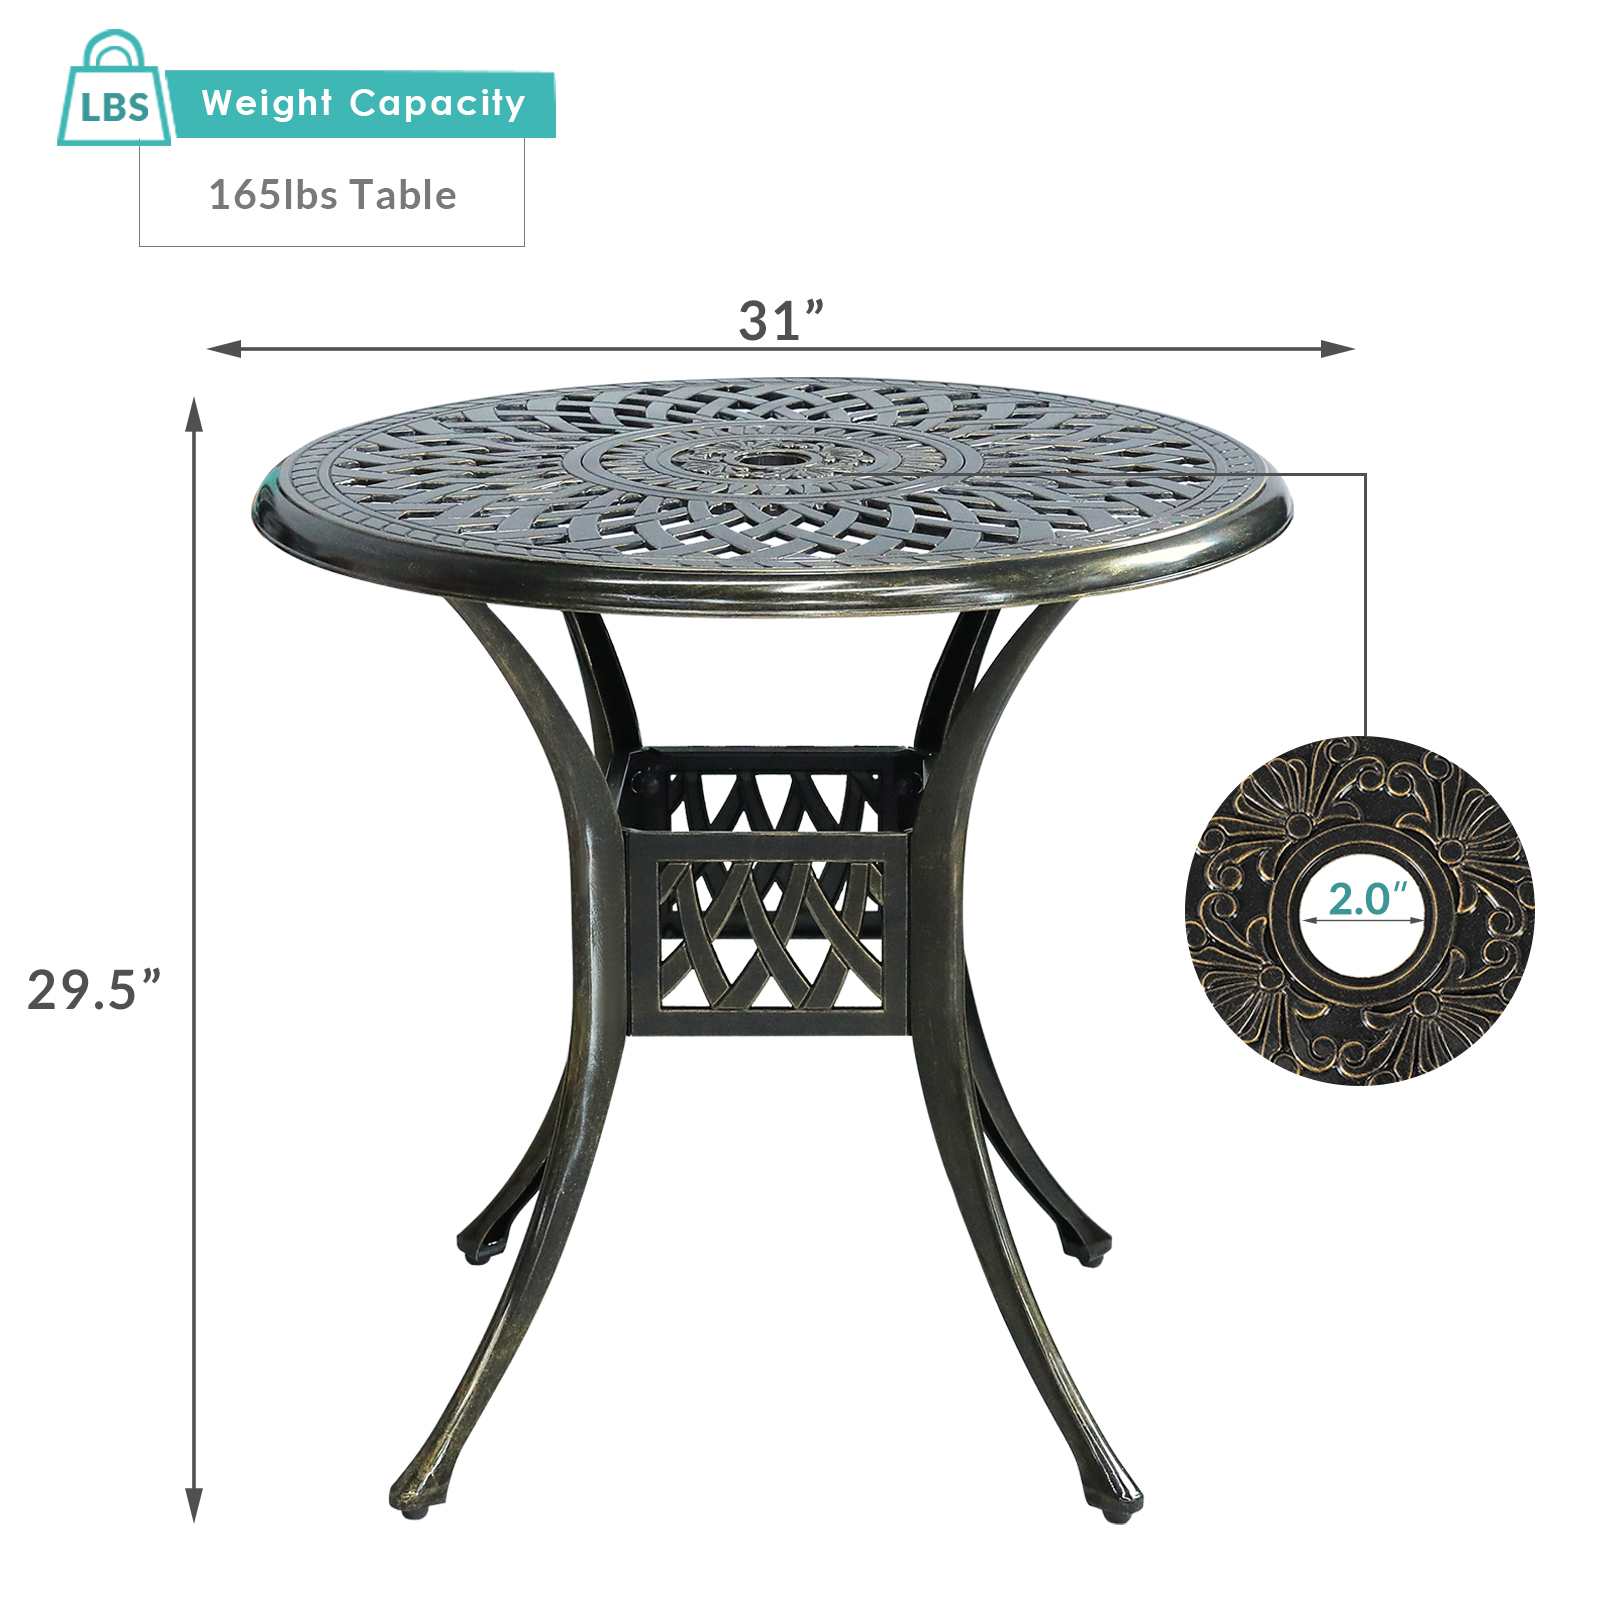 MEETWARM 31" Round Patio Bistro Table, Outdoor Cast Aluminum Small Dinning Table with 2" Umbrella Hole, Dark Bronze - image 5 of 7